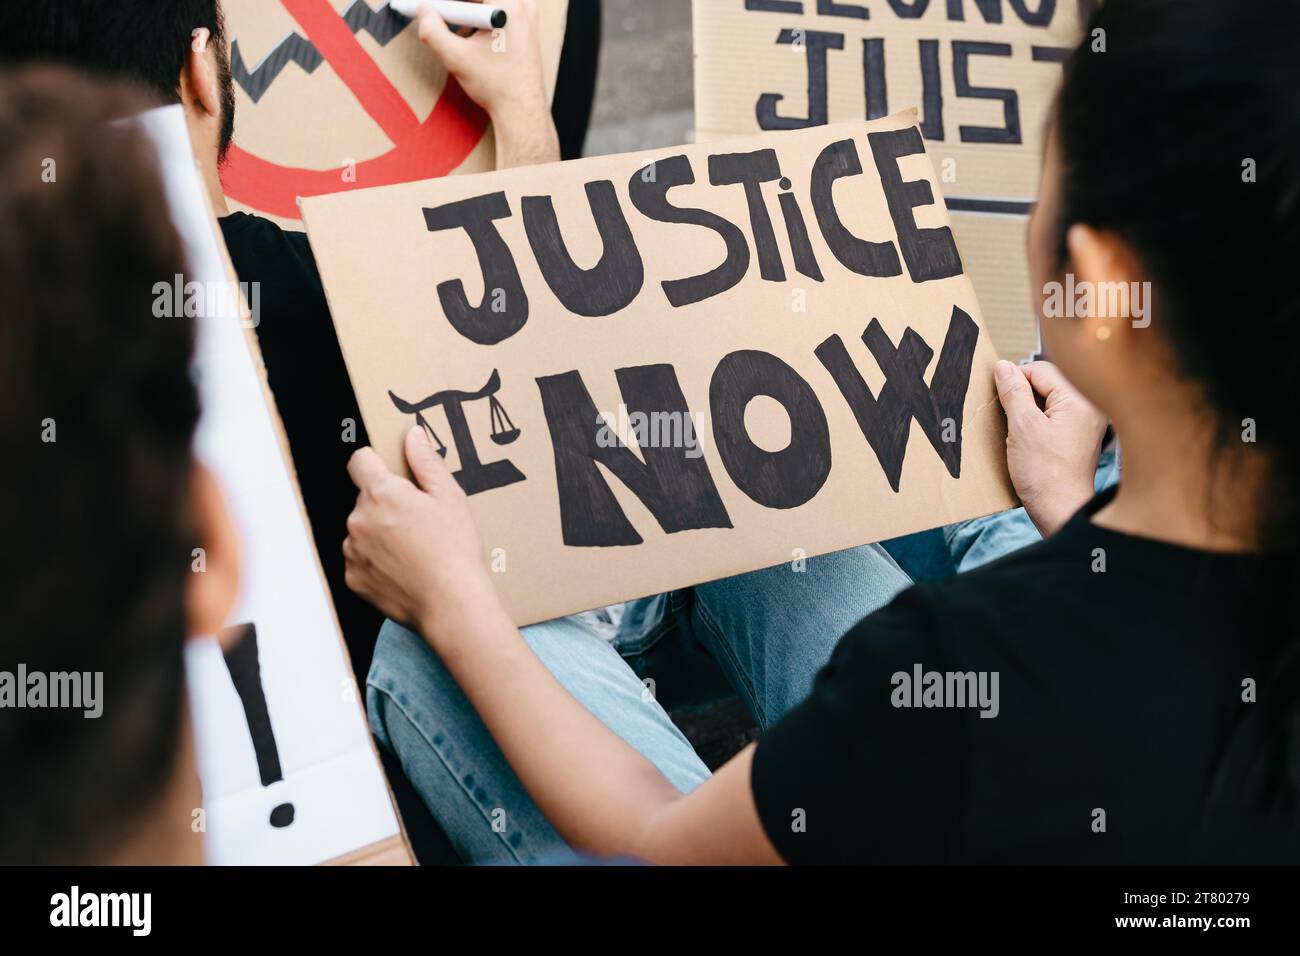 Activists protesting against financial crisis and global inflation - Activism and economic justice concept Stock Photo